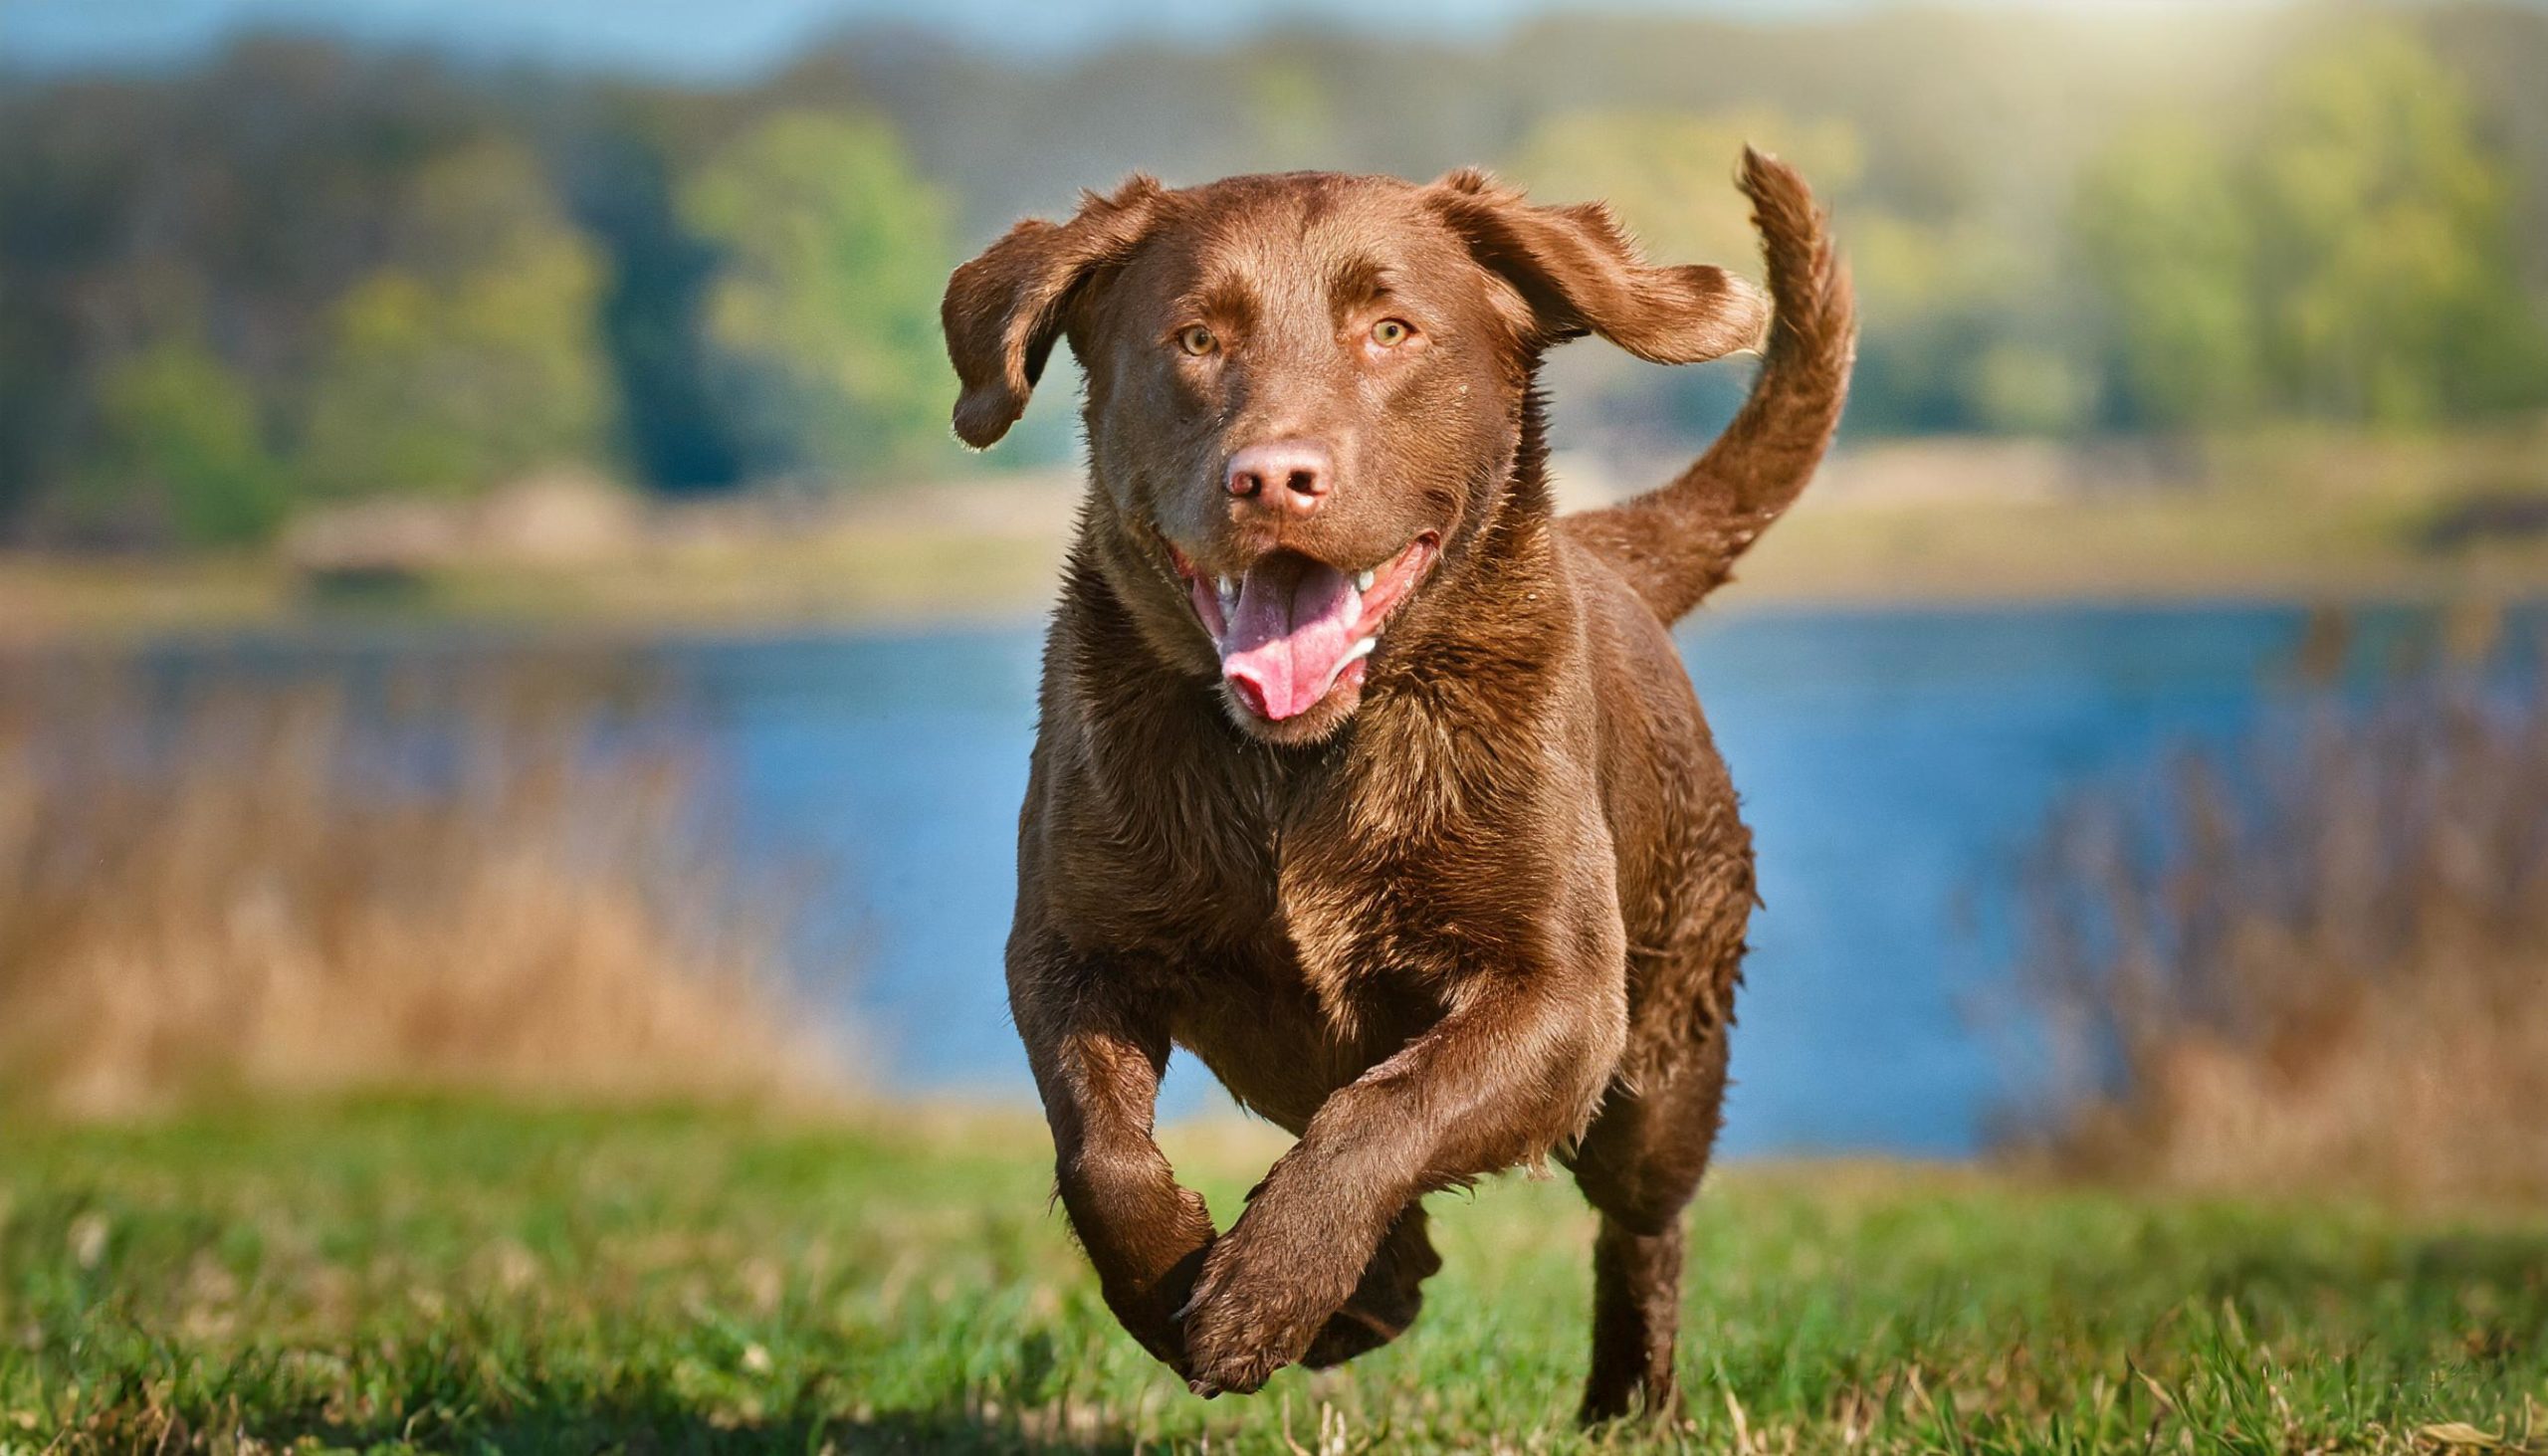 Chesapeake bay retriever enjoying his daily walk for some well deservered excersize and mental stimulation